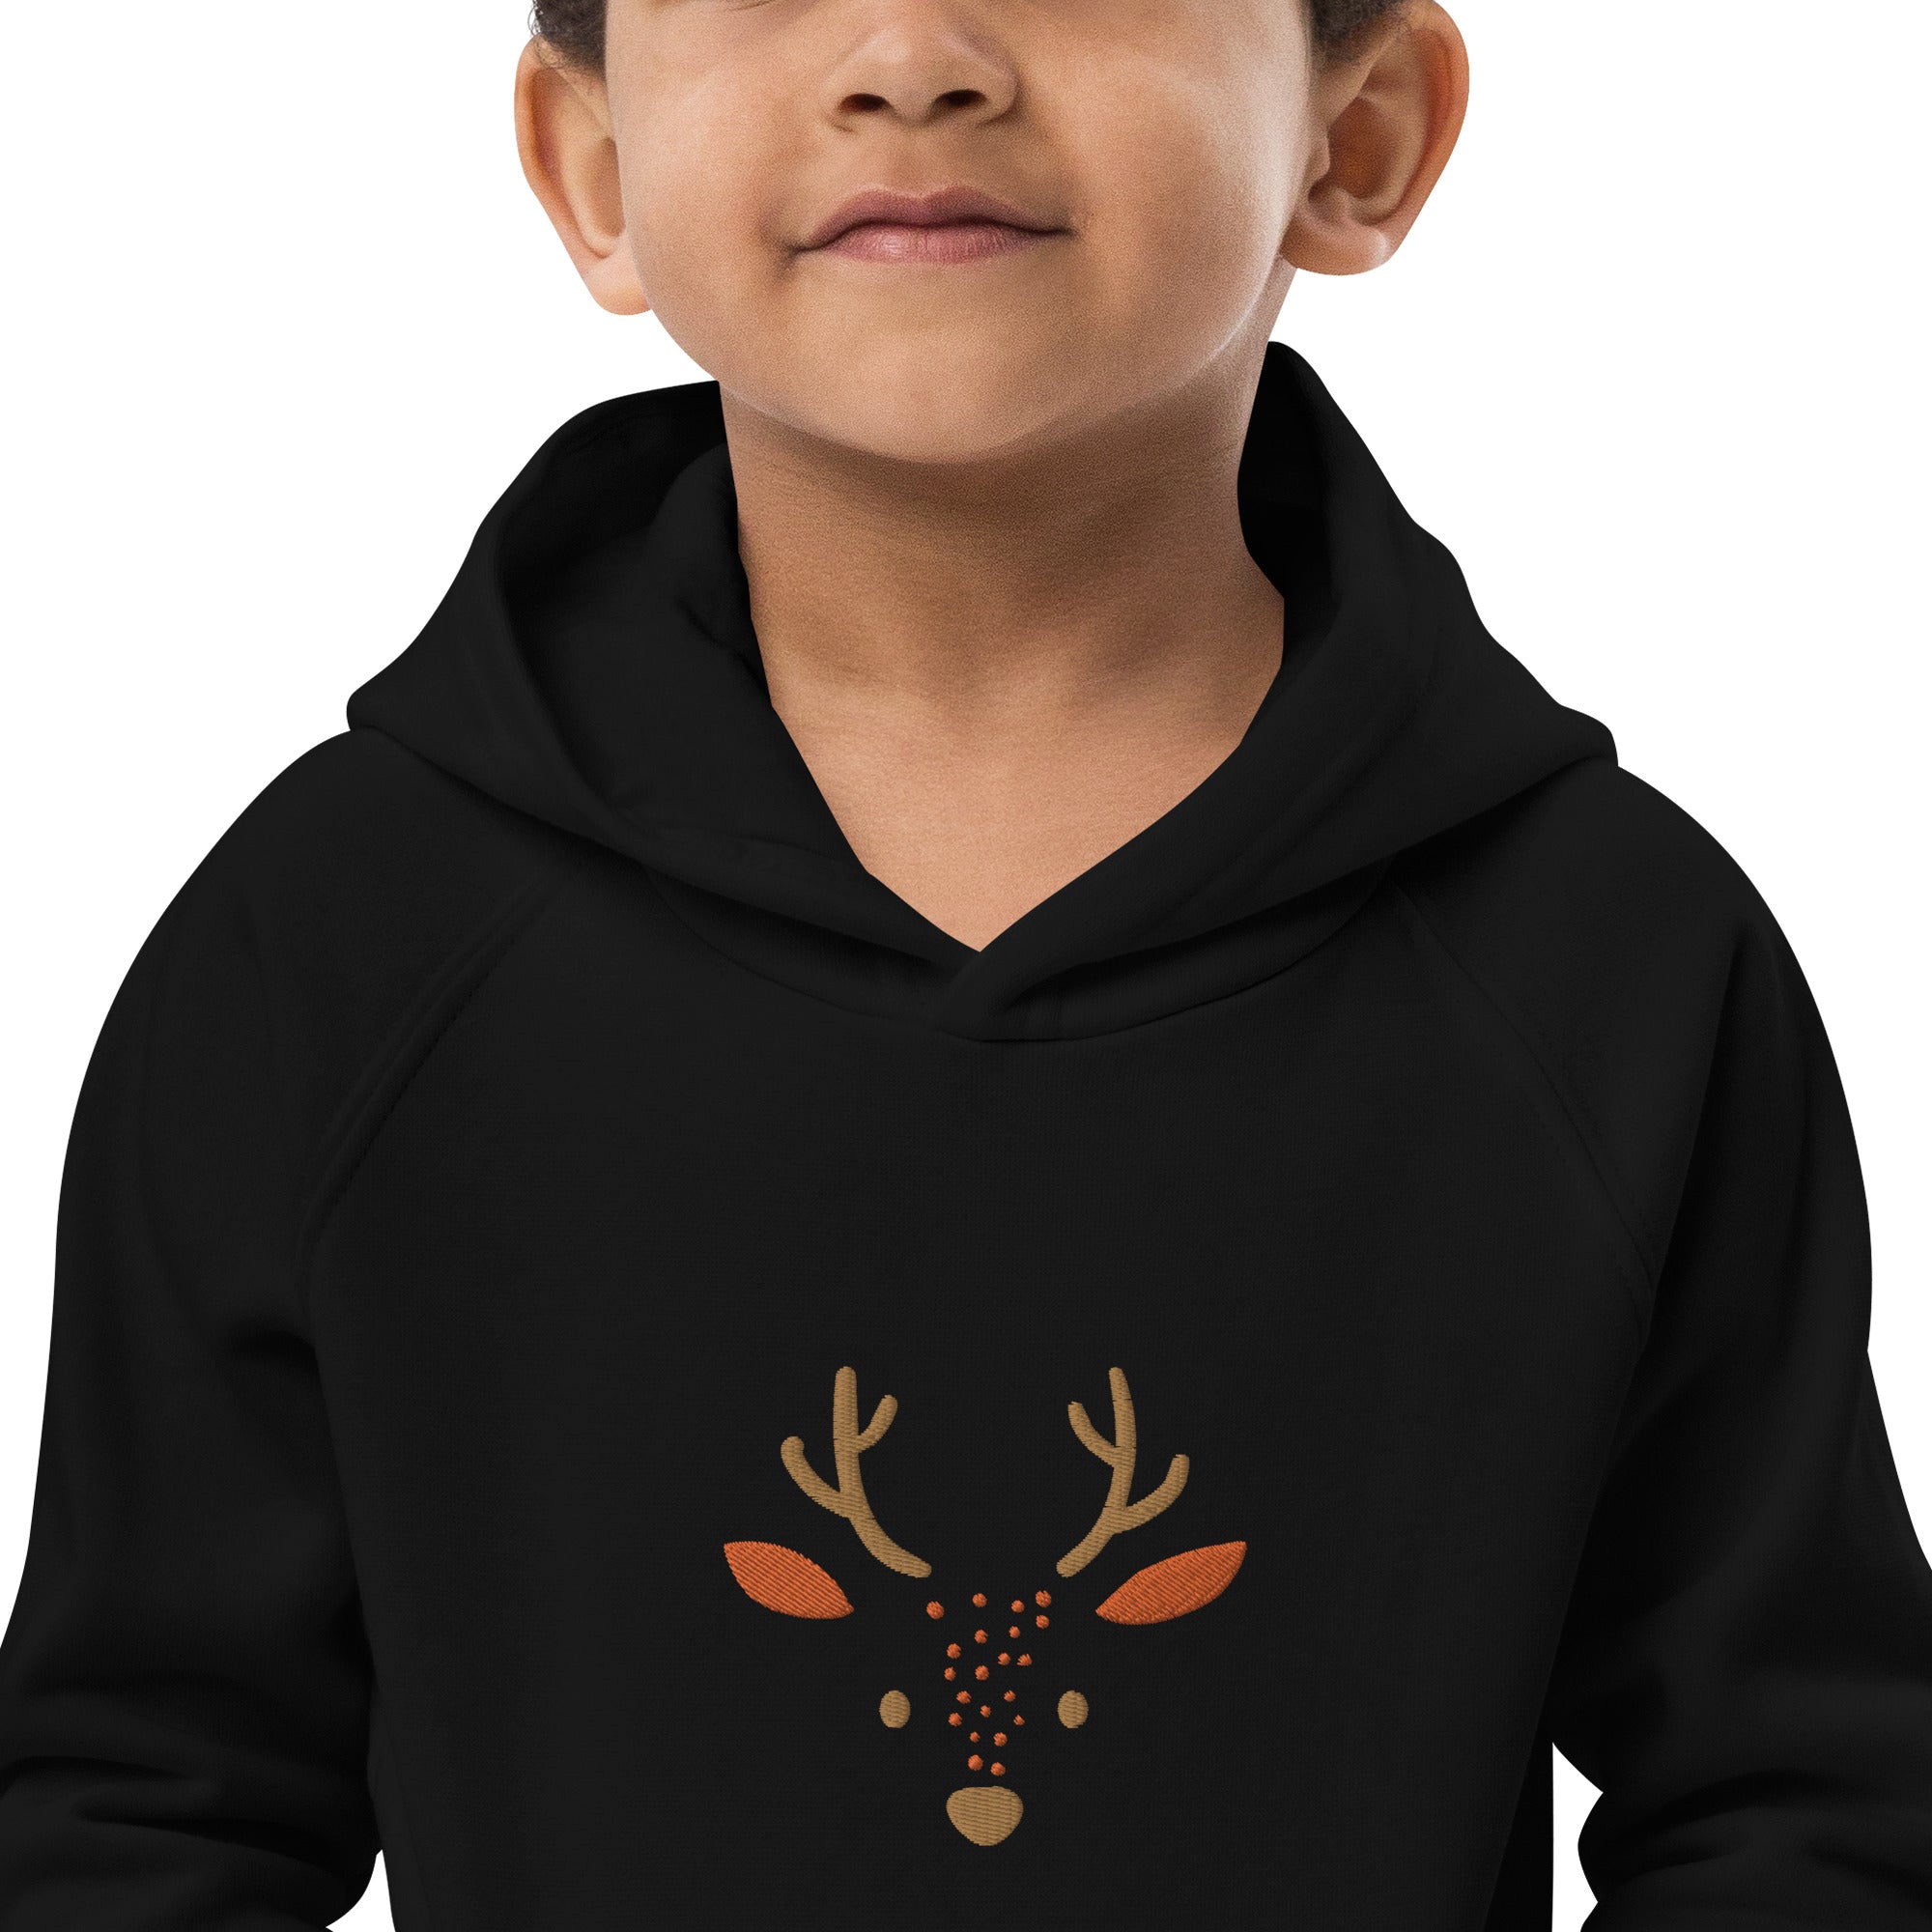 Deer 2 Kids Eco Hoodie with cute animals, Organic Cotton pullover for children, gift idea for kids, soft hoodie for kids for Christmas-0